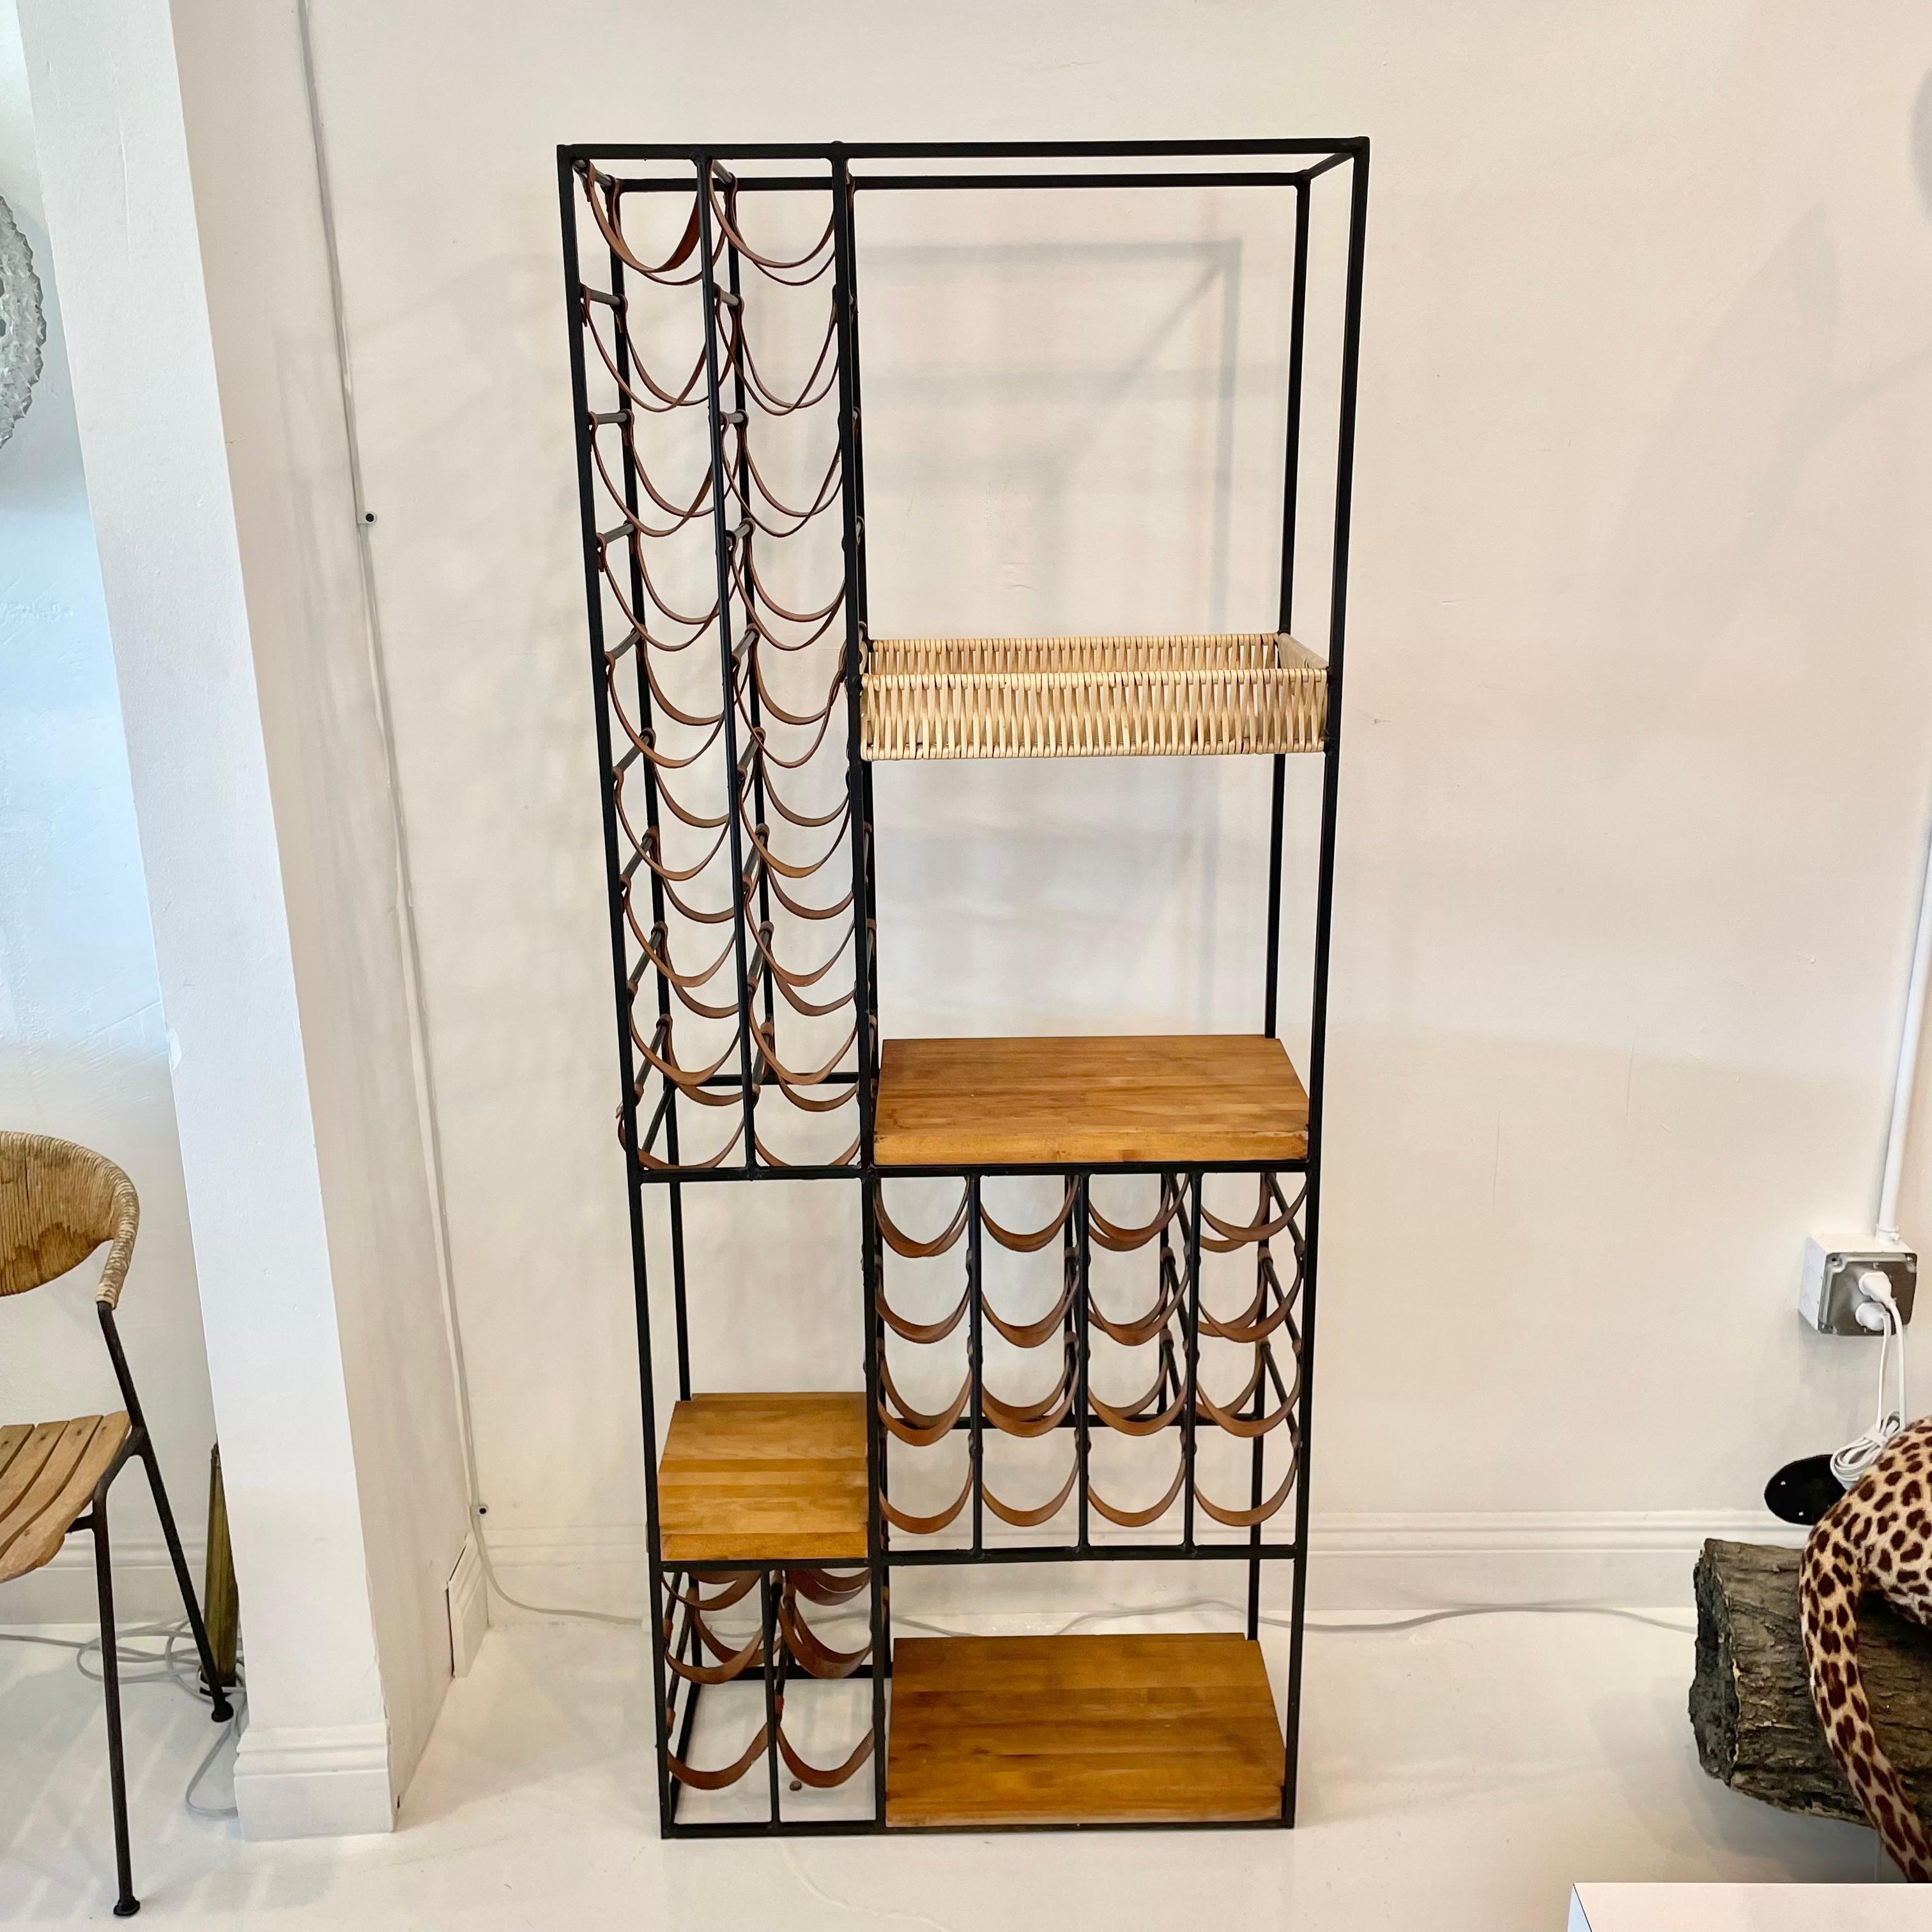 Fantastic Arthur Umanoff wine rack in iron, leather and wood block. Holds 40 bottles in the leather slings held in place by iron bars and metal grommets. Four additional wood shelves for objects, books or more bottles. Stunning condition with